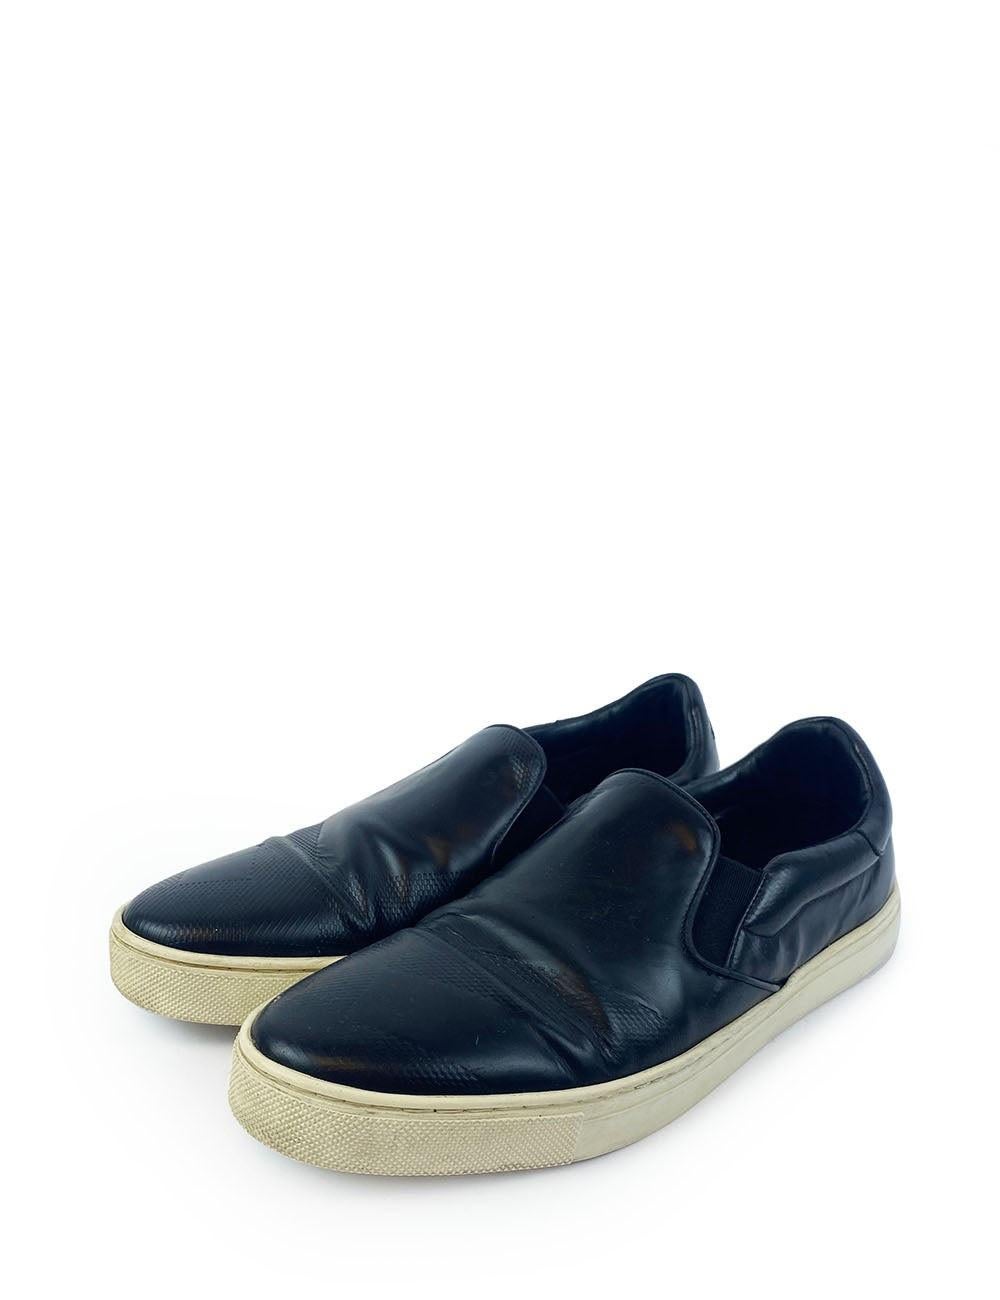 Burberry Black Slip on Leather Loafers with White Soles

Material: Leather
Size: EU 41.5
Condition
Overall Condition: very good
Interior Condition: signs of use
Exterior Condition: leather wrinkling and creasing.
